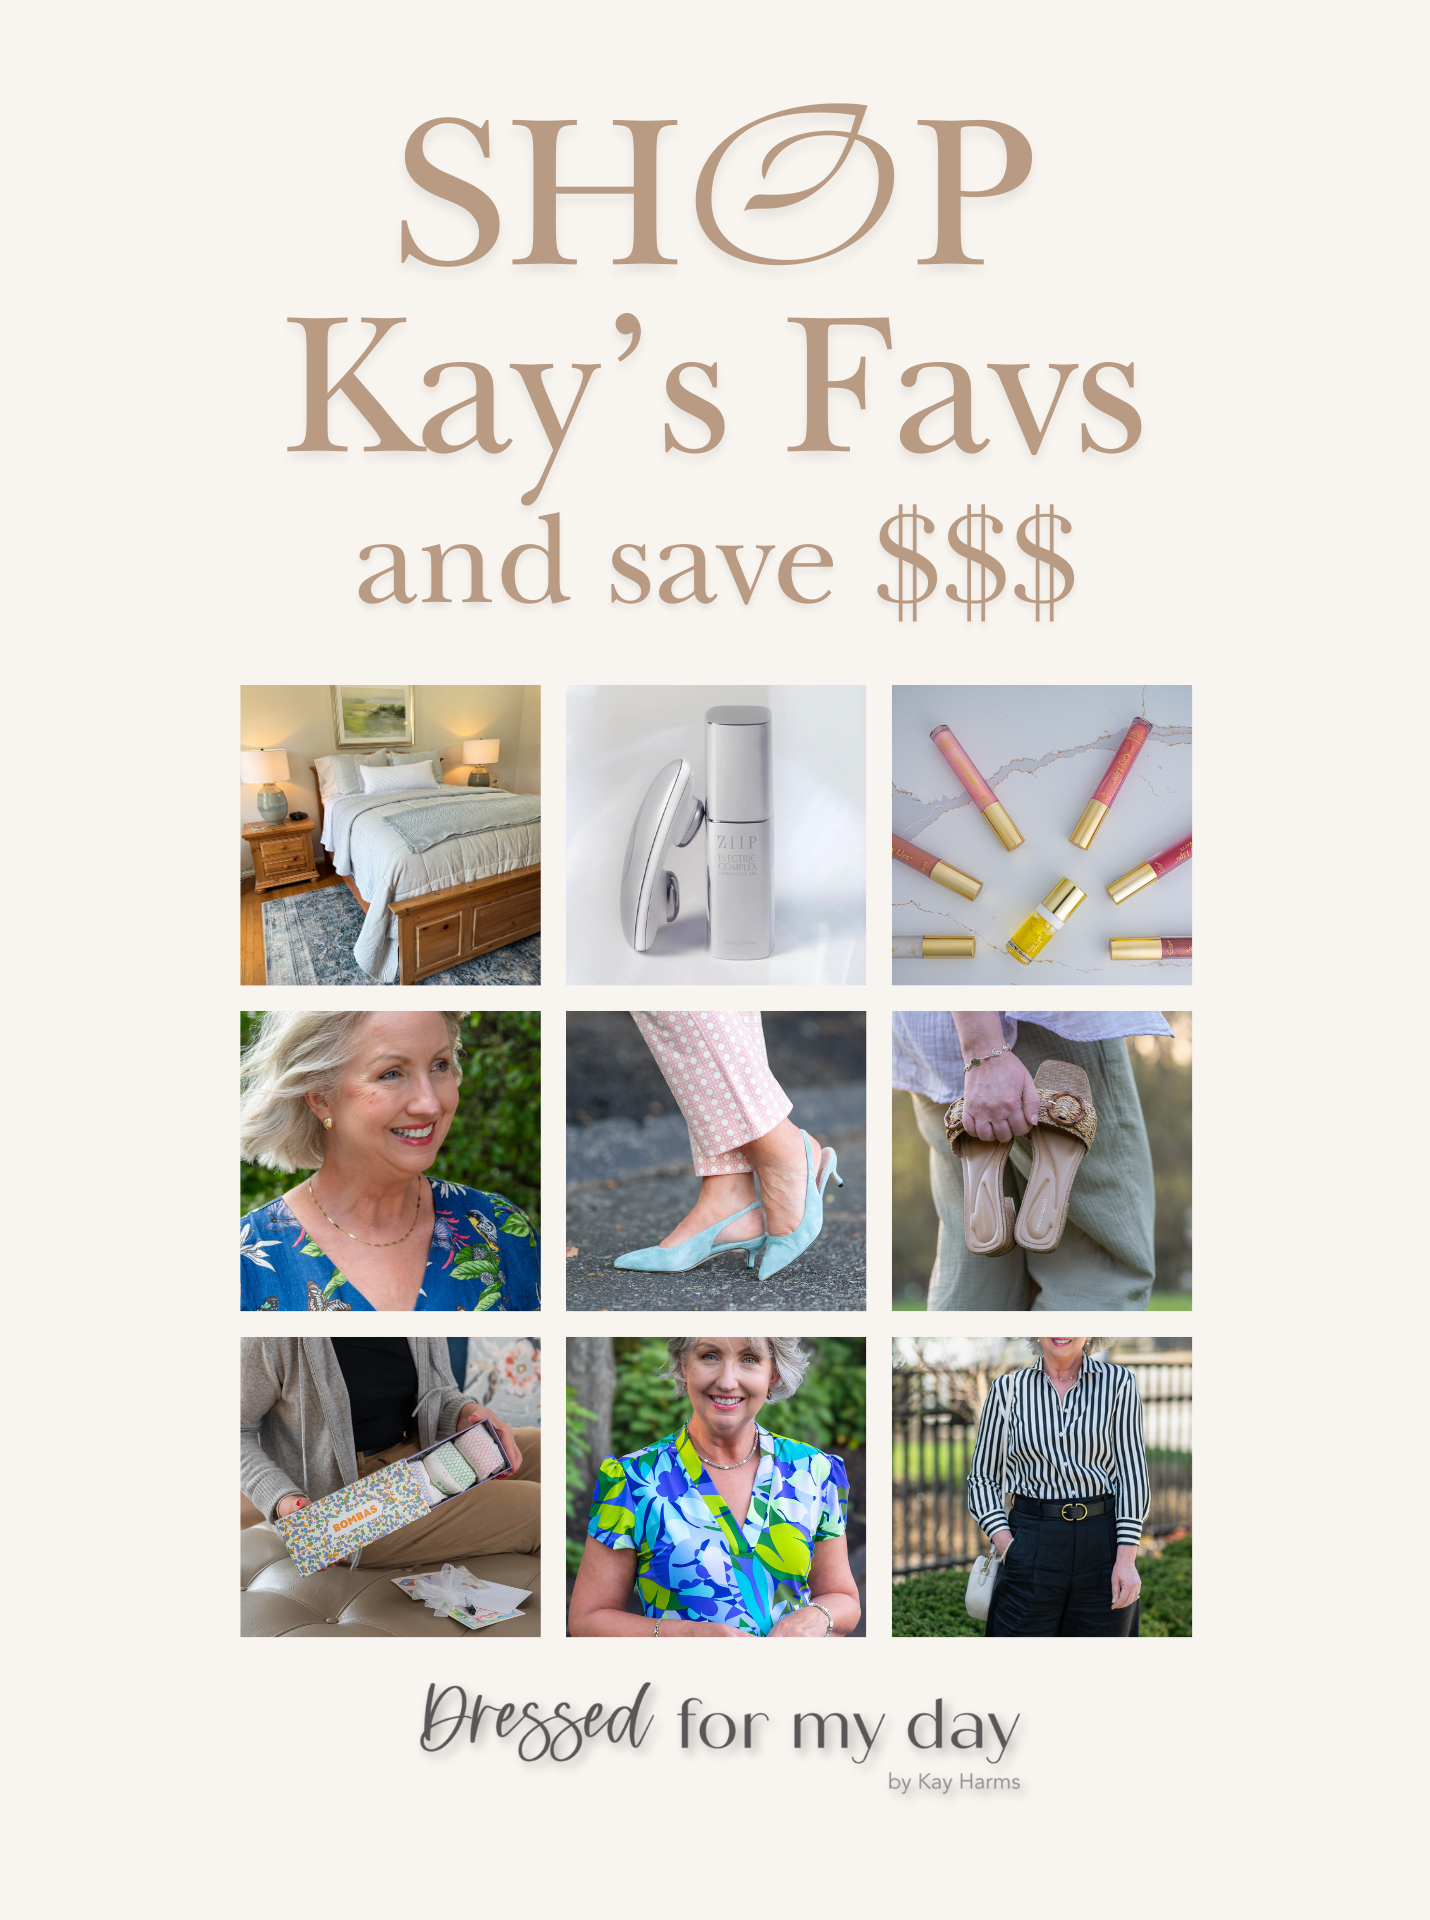 Shop Kay's Favs and Save Money